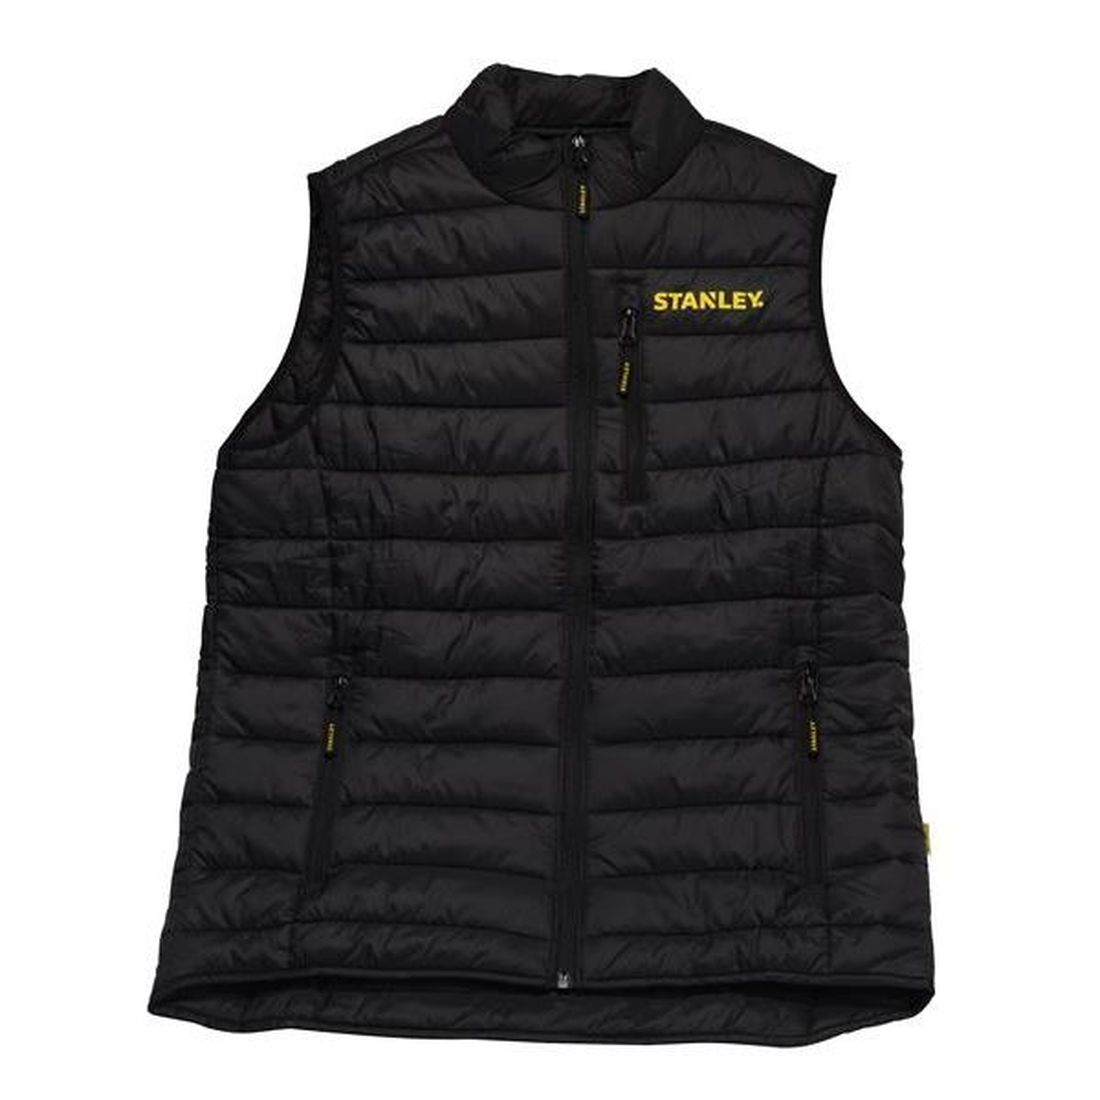 STANLEY Attmore Insulated Gilet - XL      